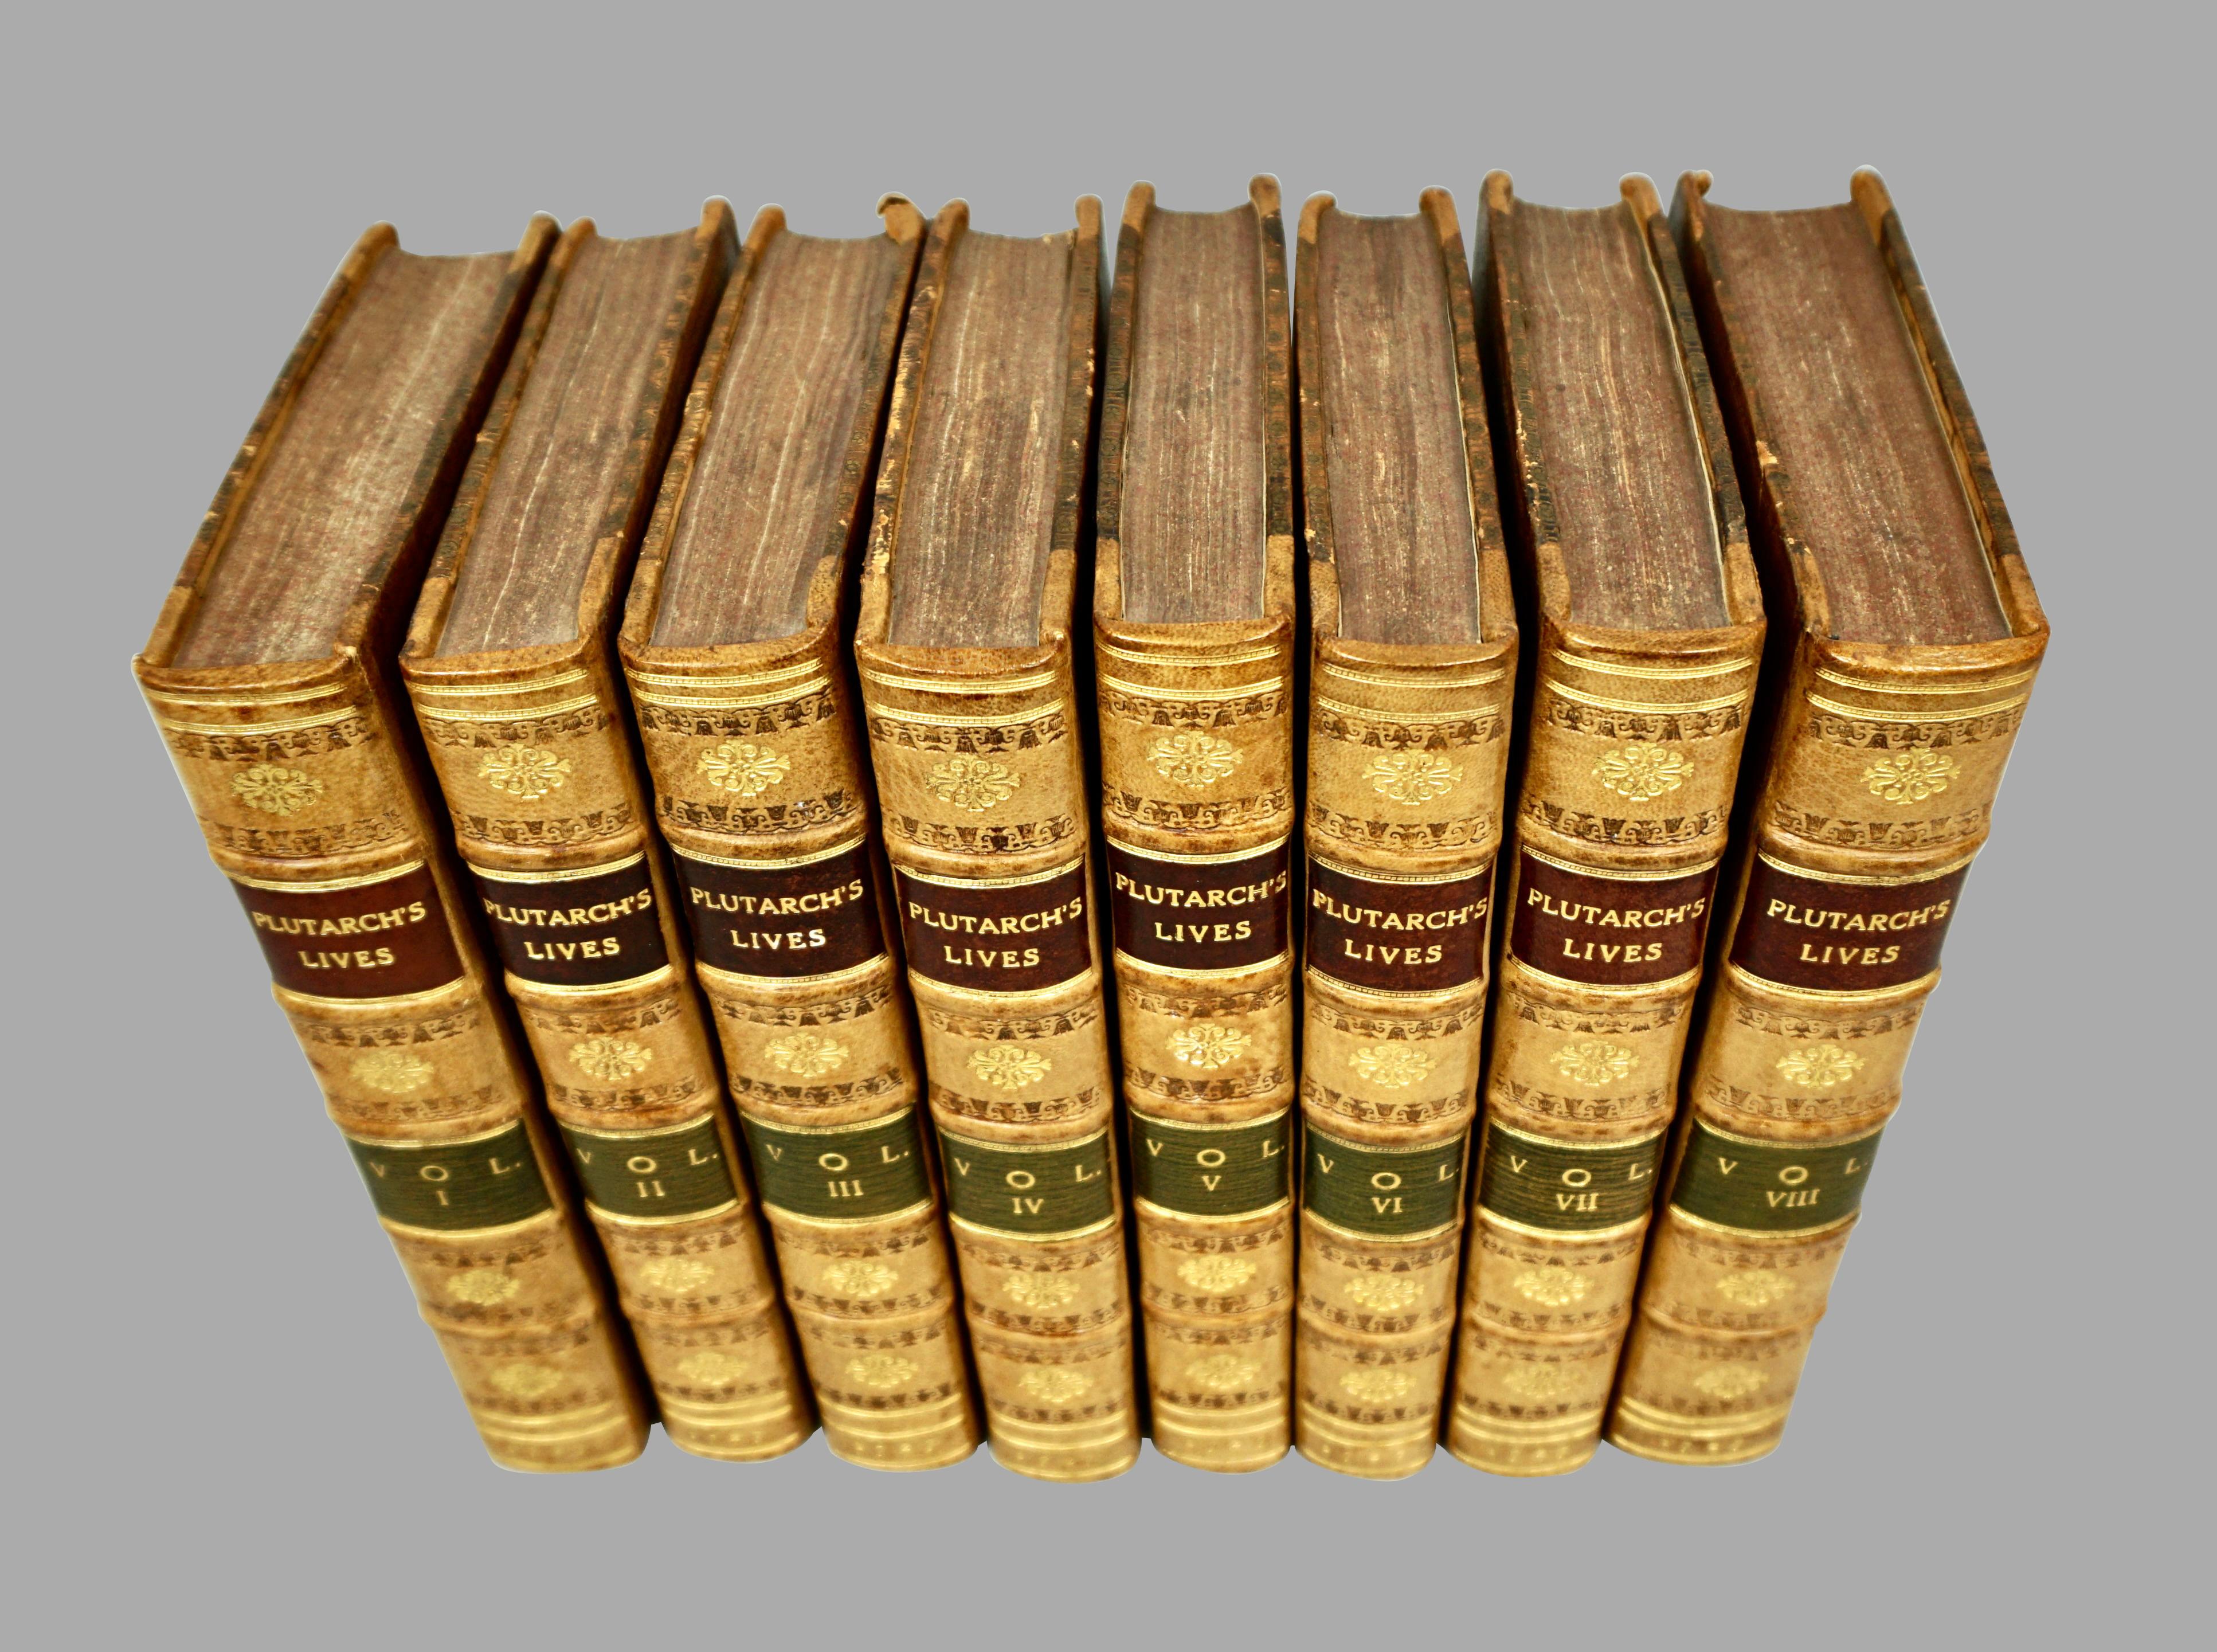 Georgian Plutarch's Lives in 8 Leatherbound Volumes Published London, J. Tonson 1727